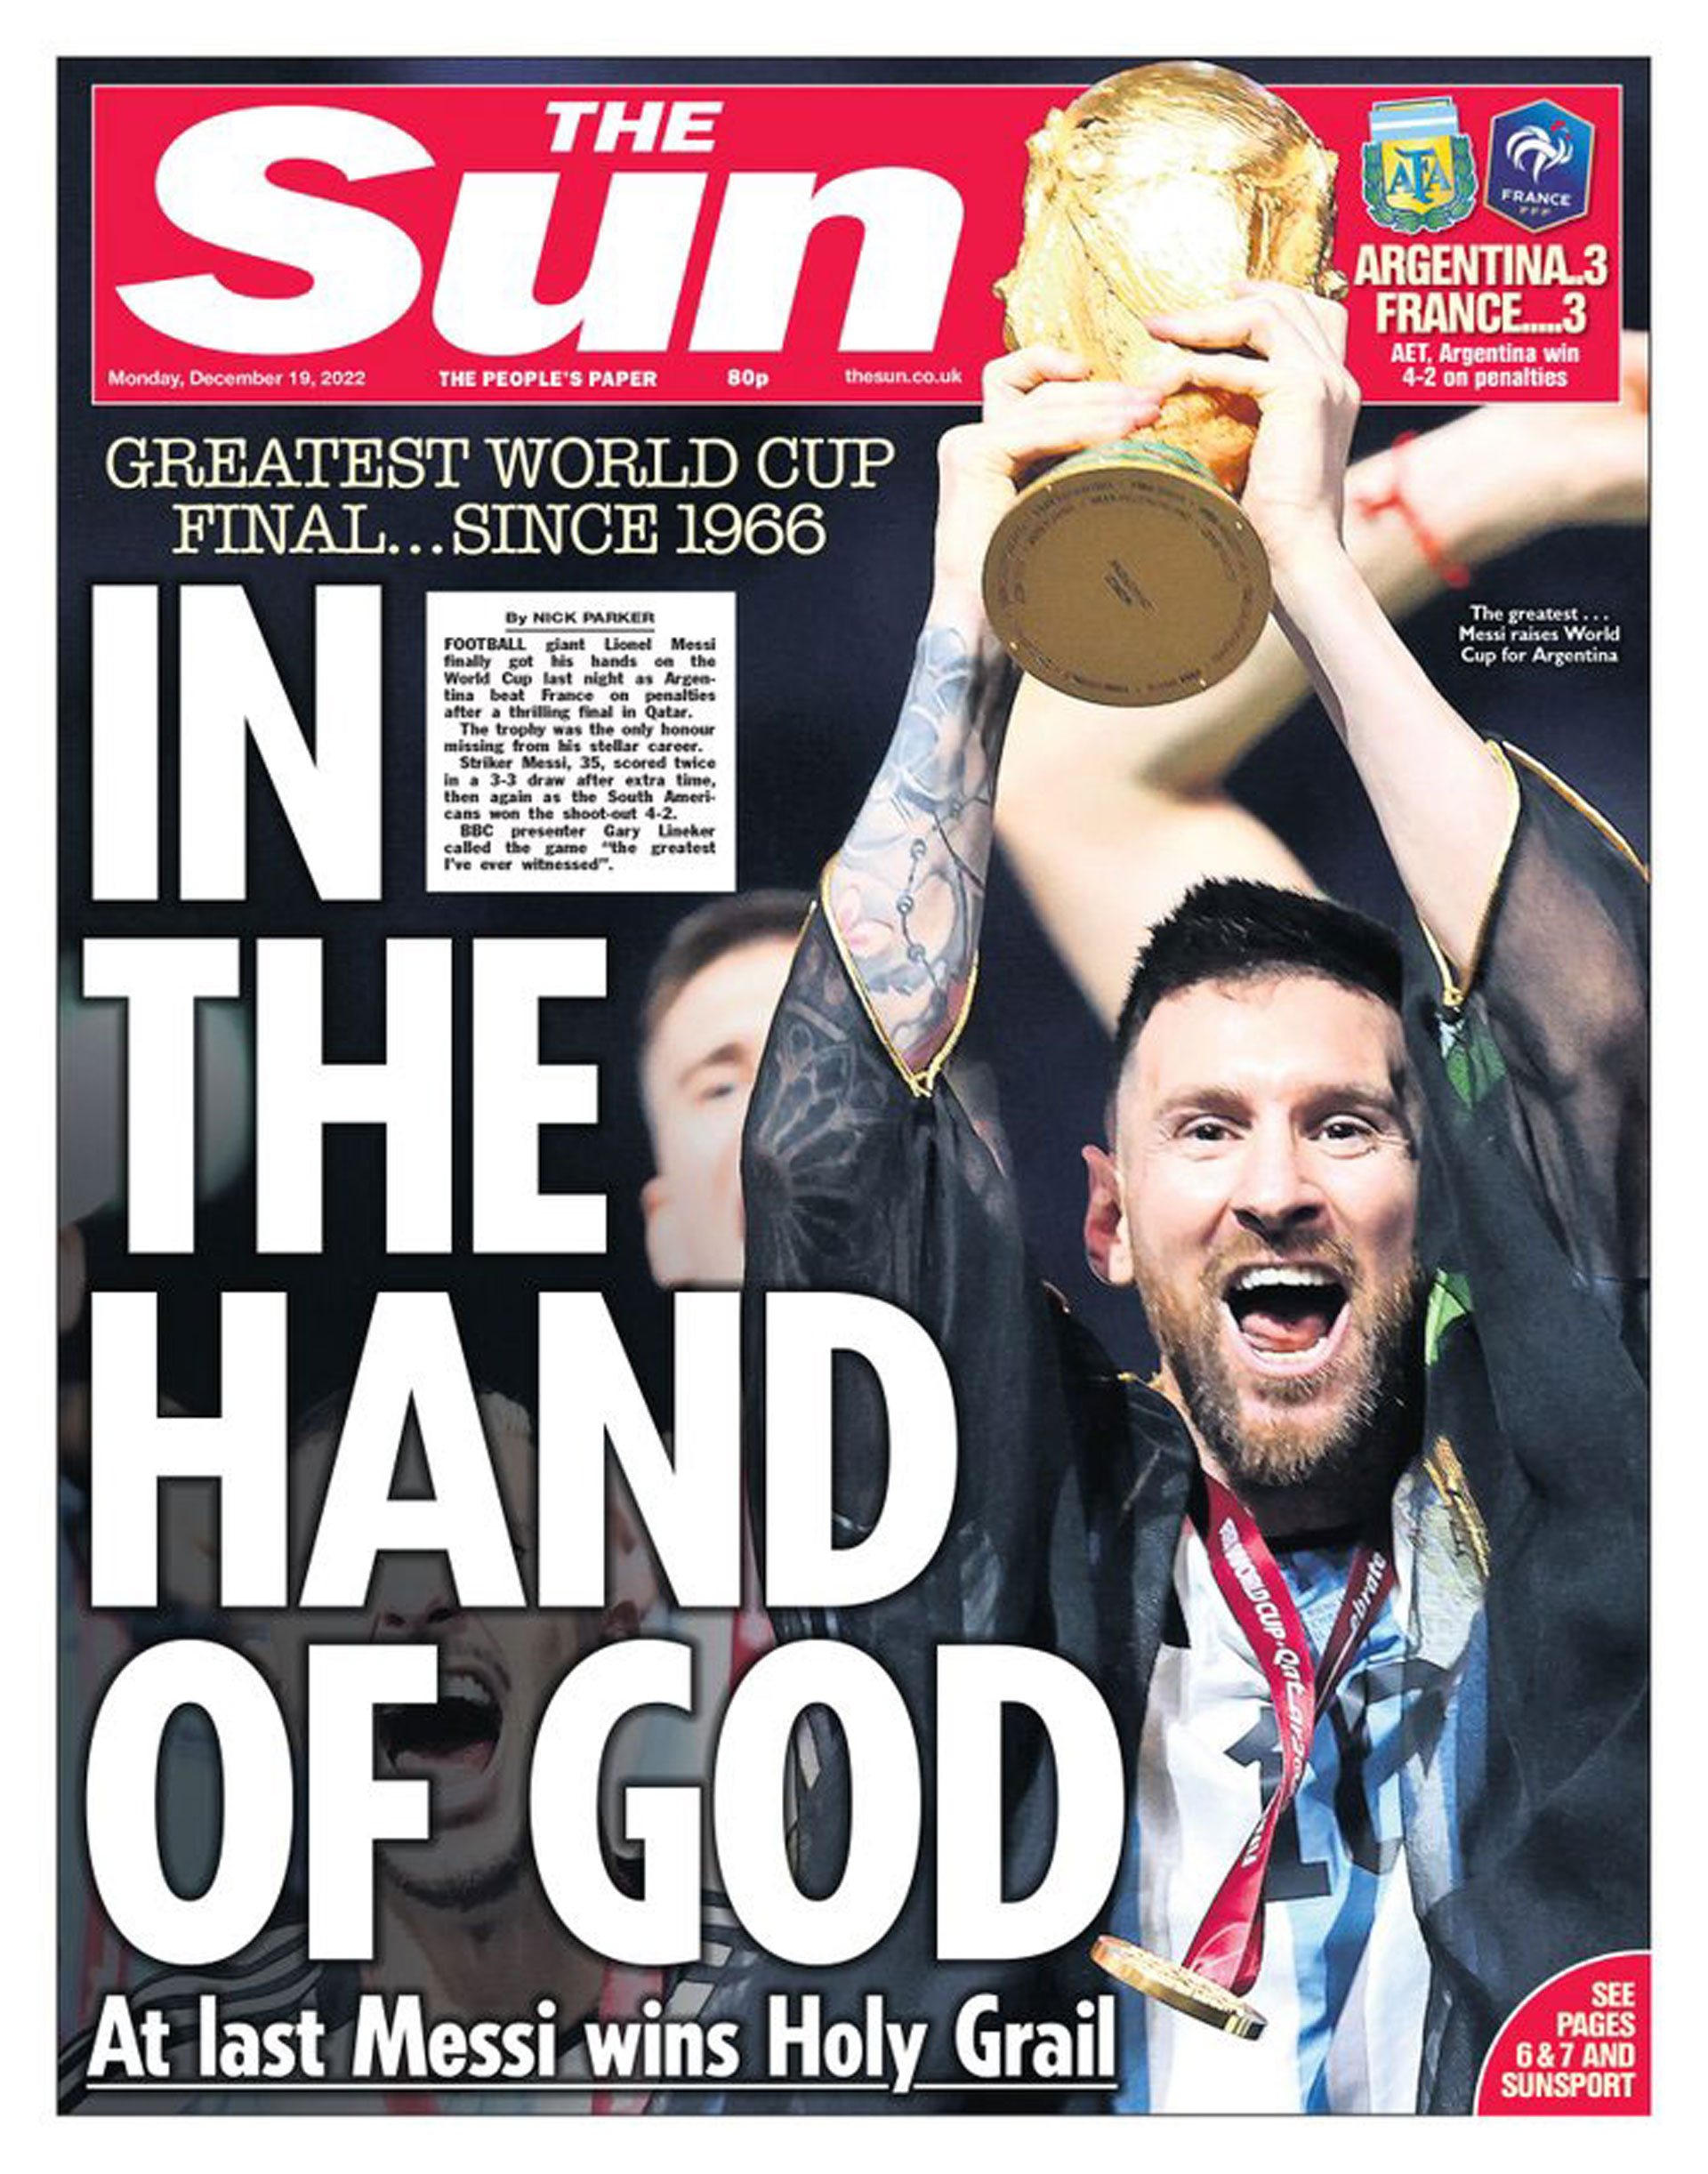 The cover of The Sun with the coronation of Argentina in the Qatar 2022 World Cup